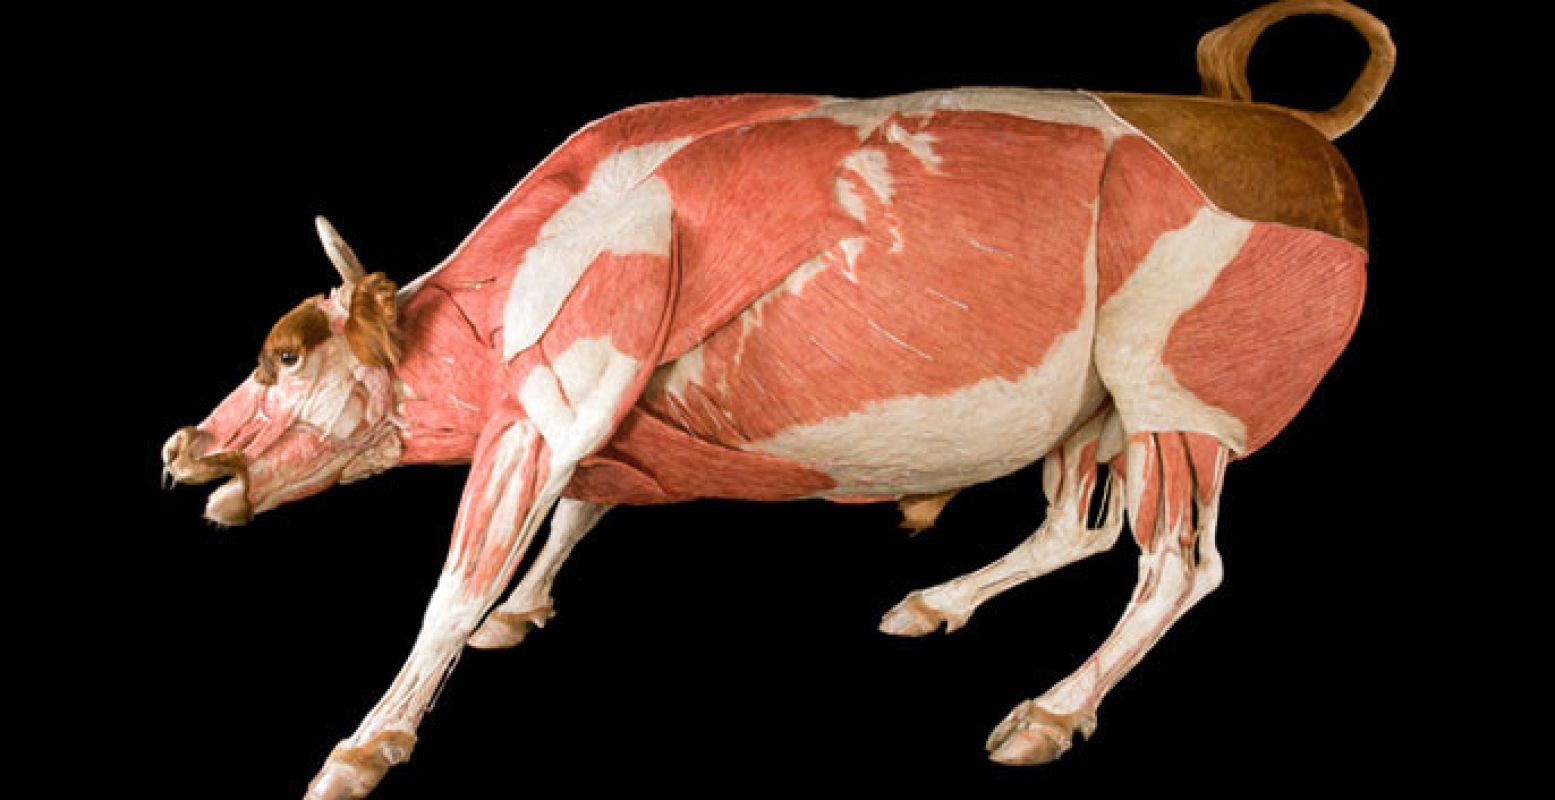 © ANIMAL INSIDE OUT, a Body Worlds Production,  www.animalinsideout.com . All rights reserved.